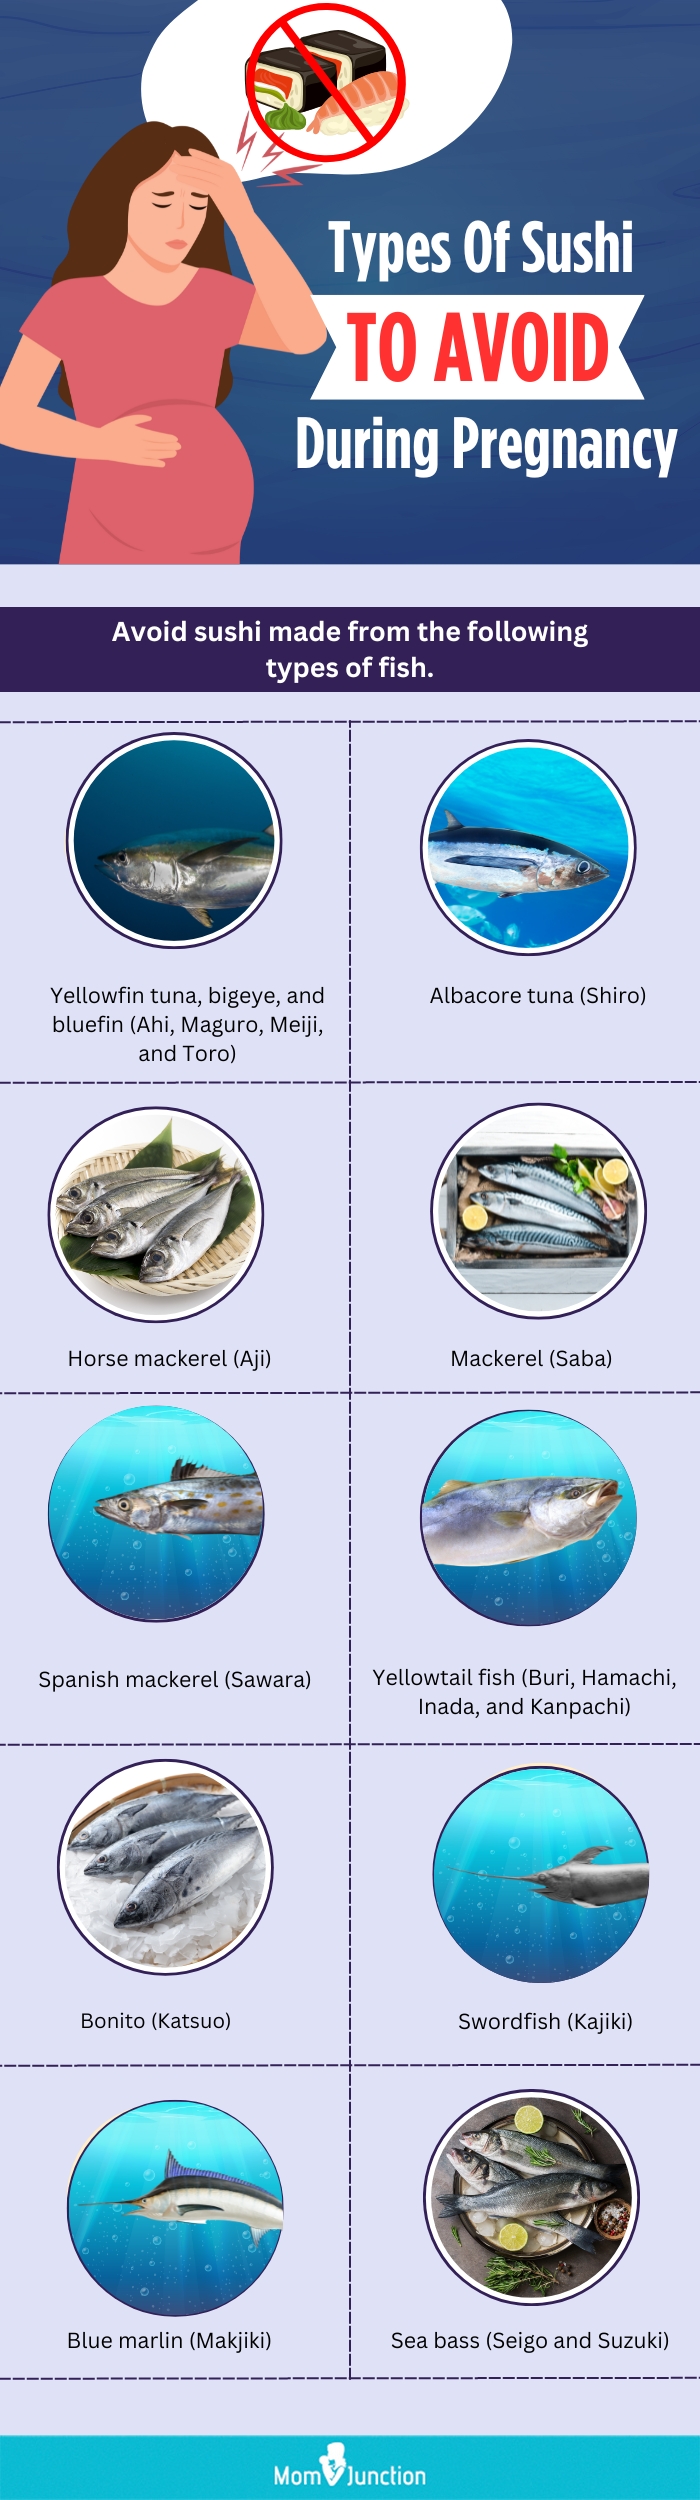 types of sushi to avoid during pregnancy (infographic) 